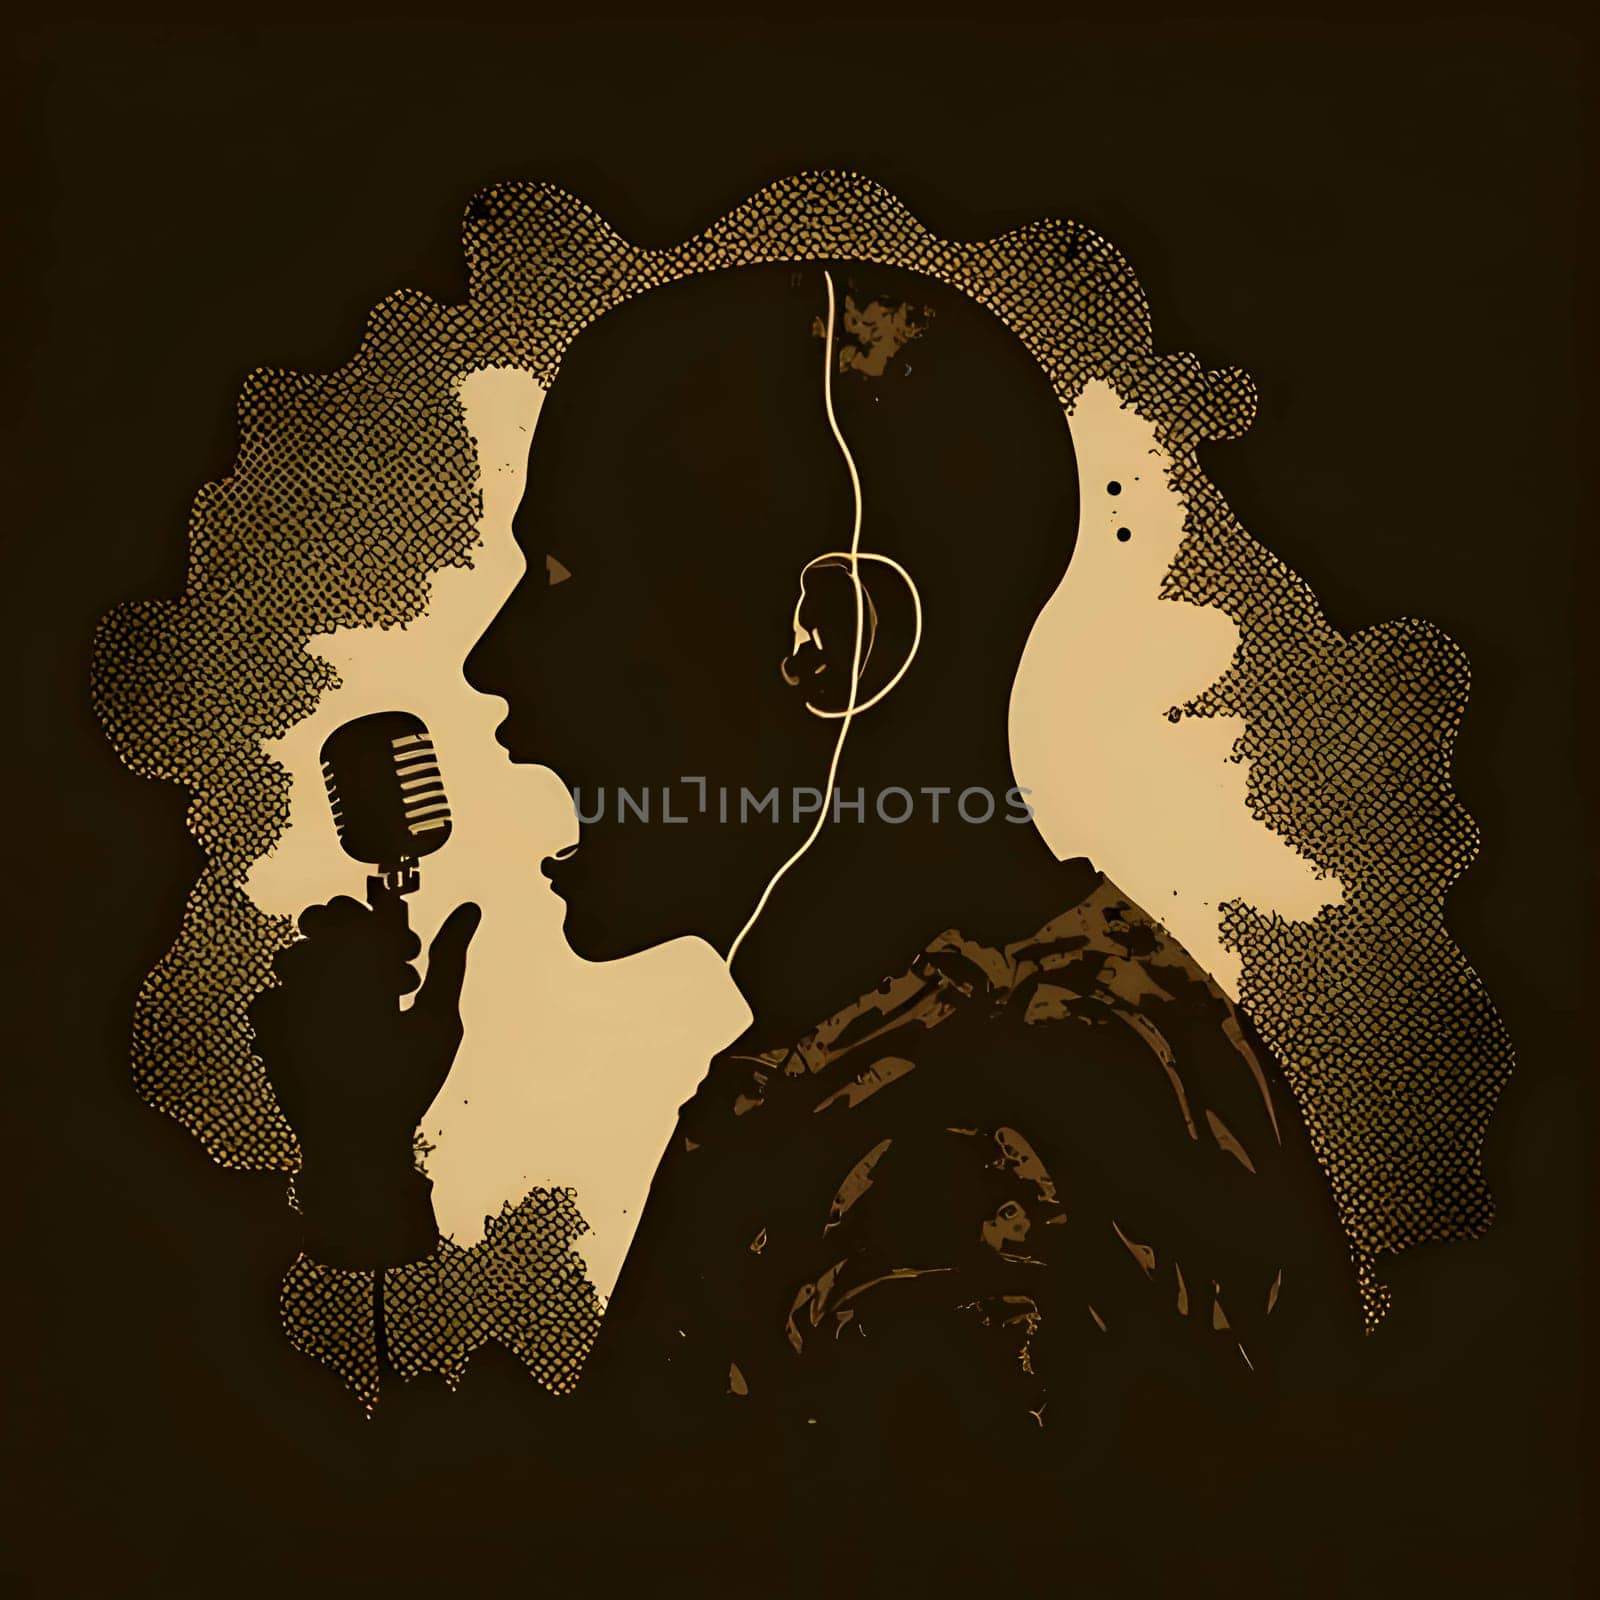 Vector illustration of a singer in black silhouette against a clean orange background, capturing graceful forms.